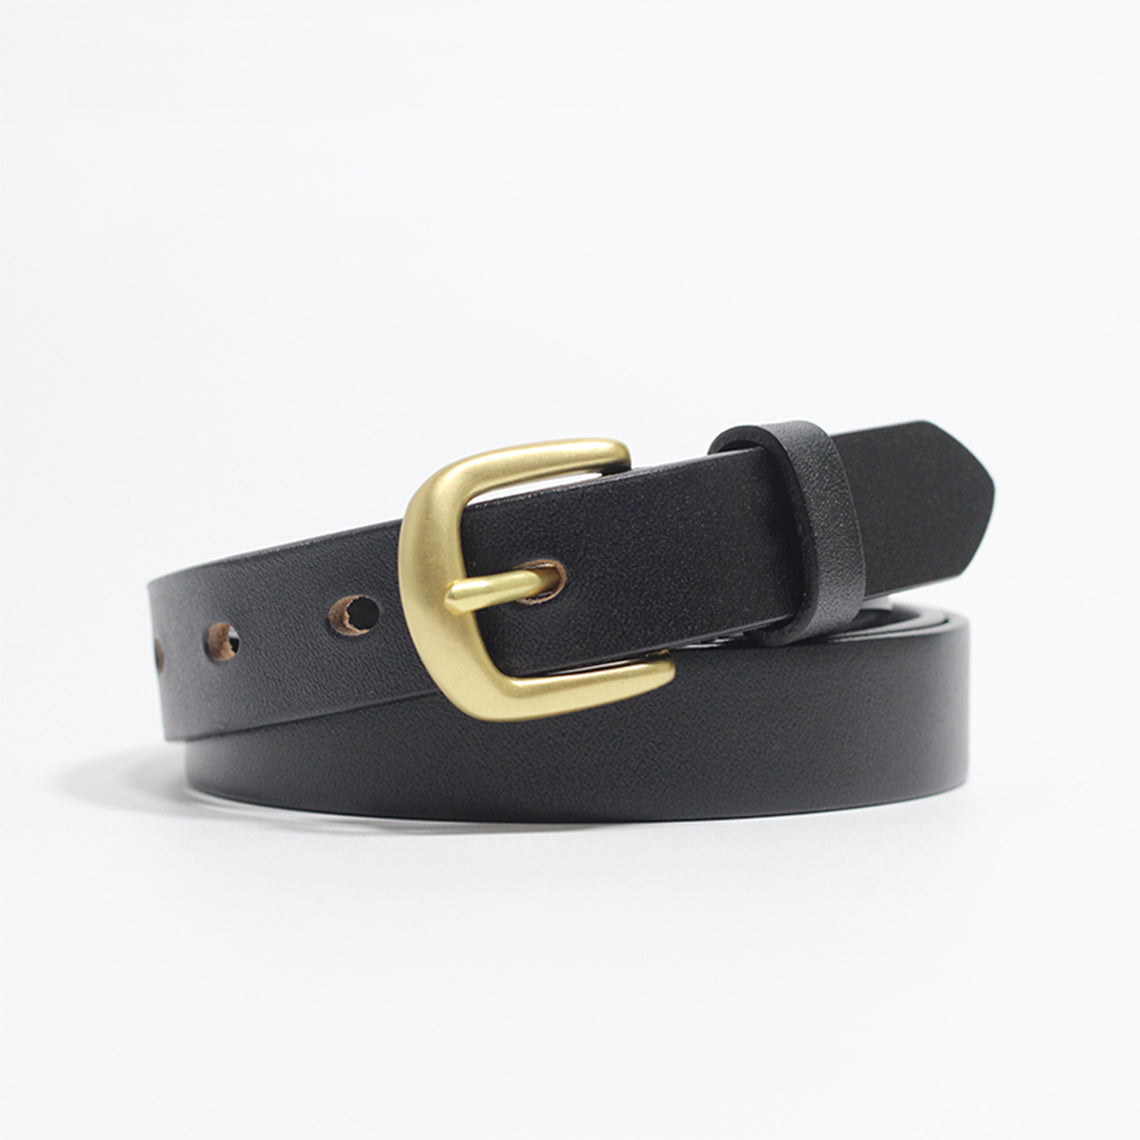 Black Leather Belts for Women | Women's Leather Belts for Jeans - POPSEWING™